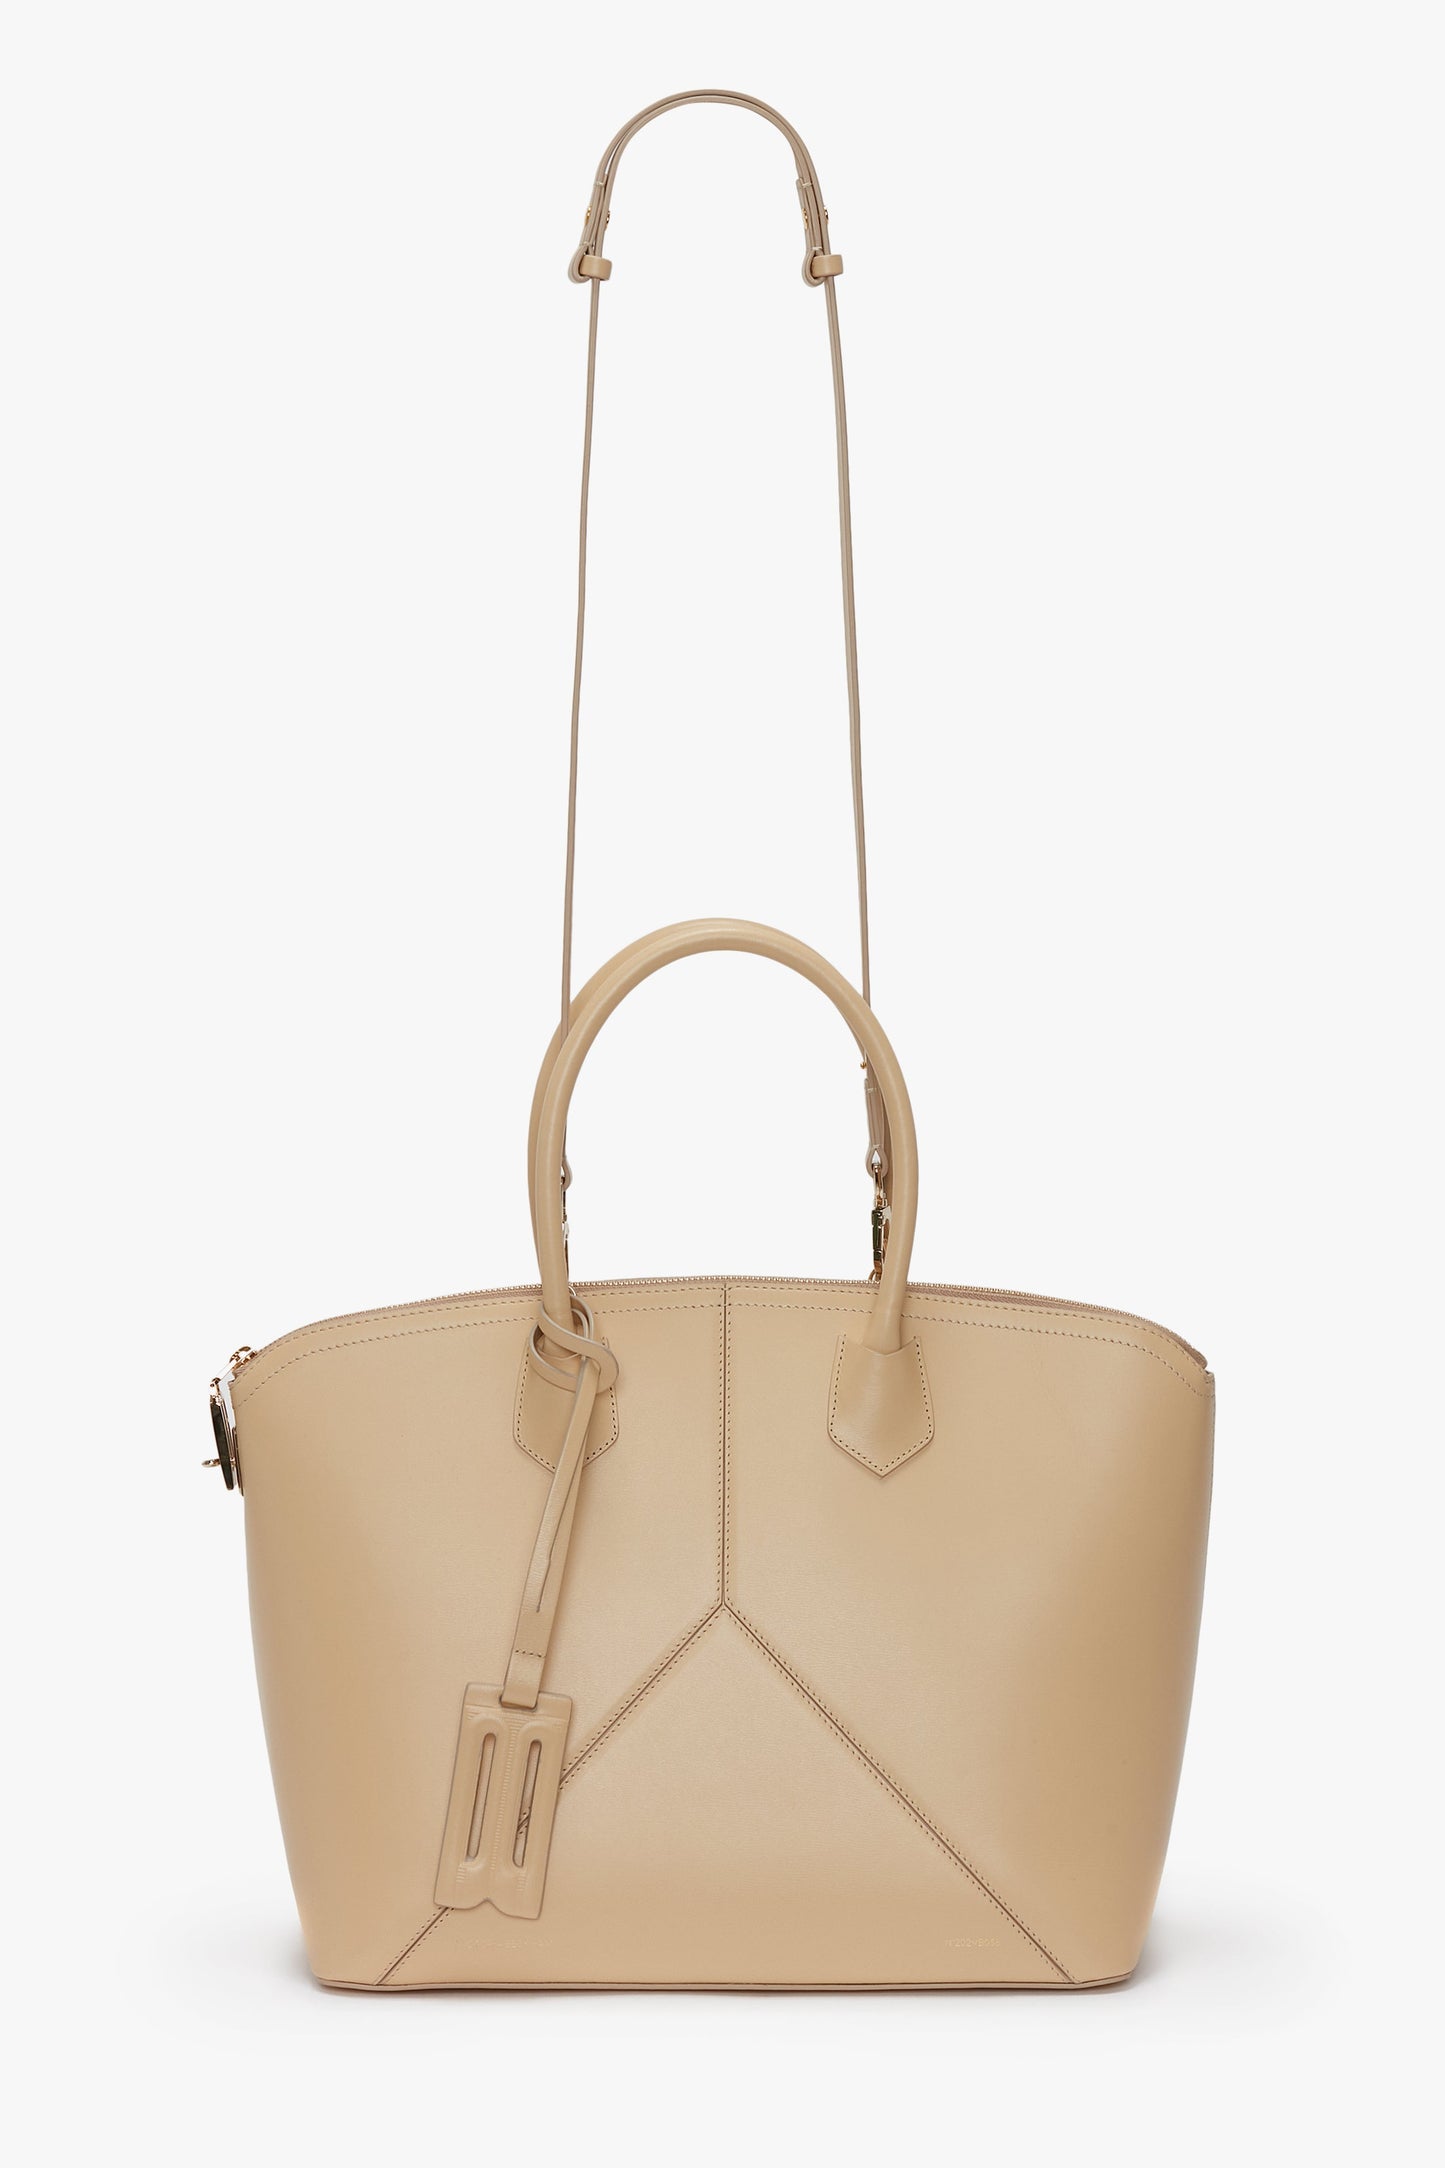 The Victoria Beckham Victoria Bag In Sesame Leather features dual top handles, leather panels, an adjustable shoulder strap, and a luggage tag attached.